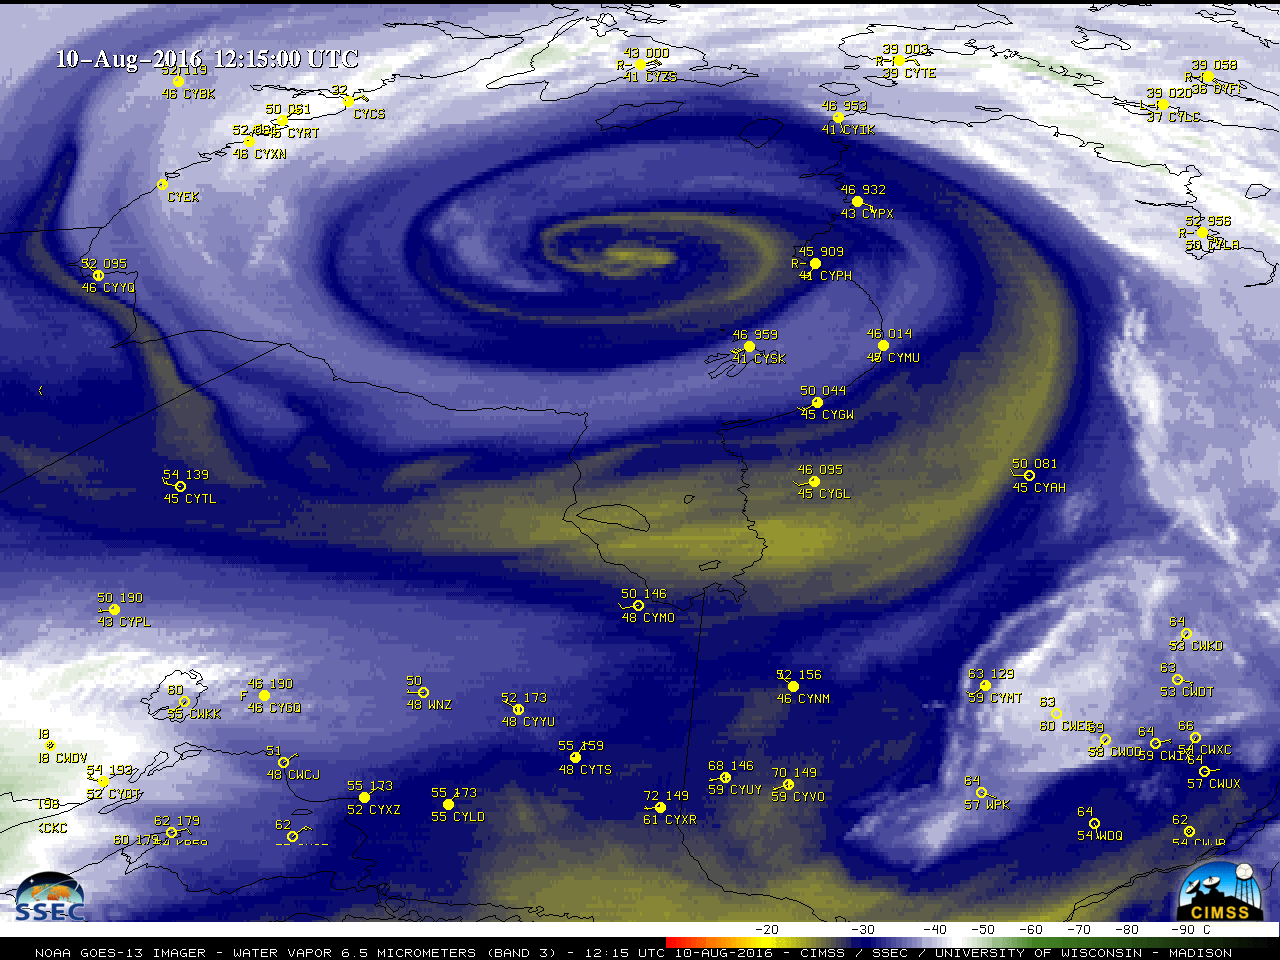 GOES-13 Water Vapor (6.5 µm) images, with hourly surface observations [click to play animation]